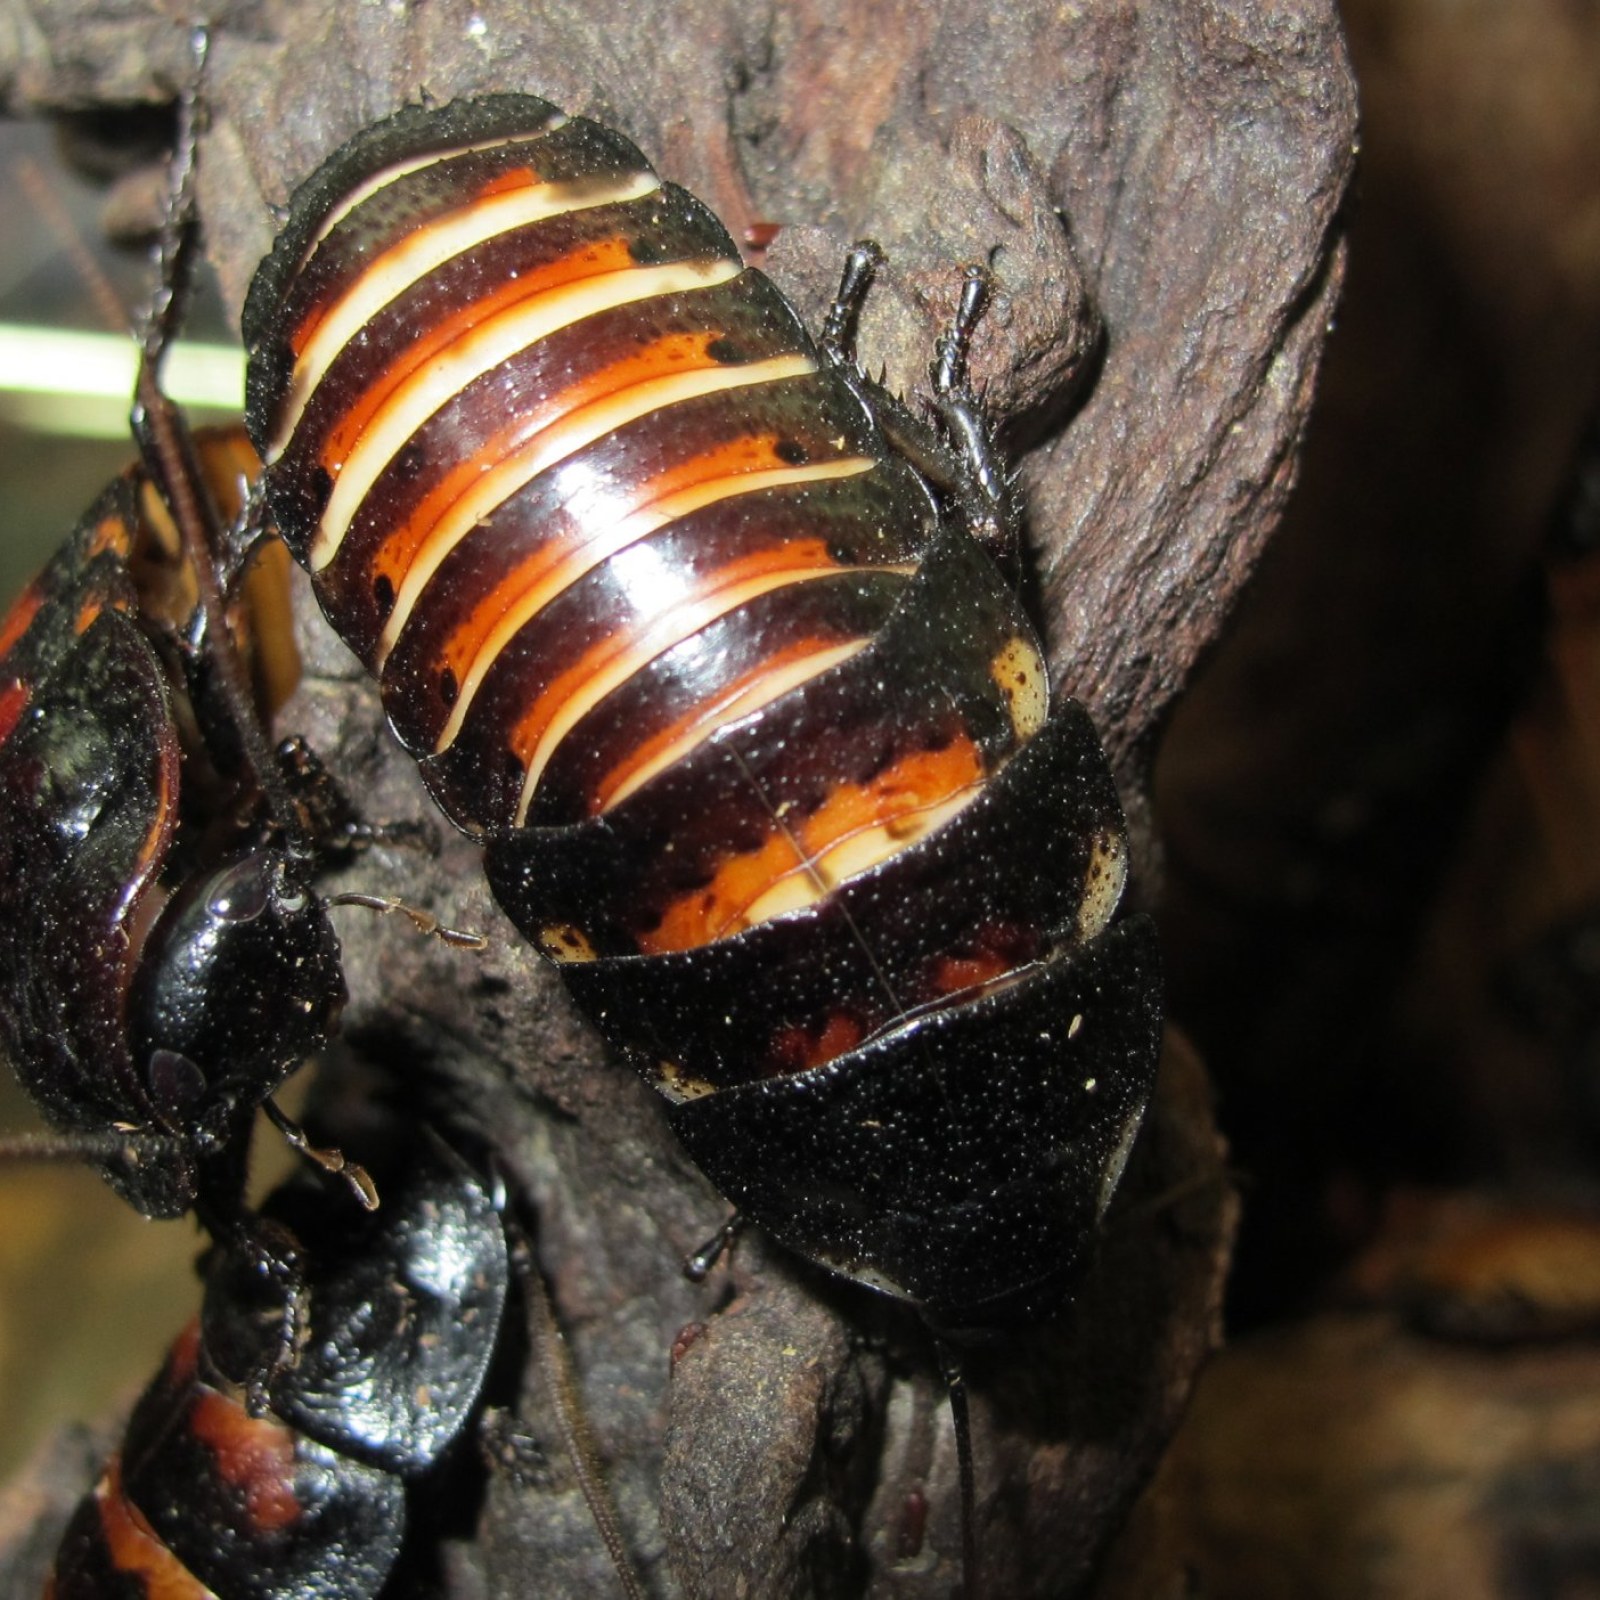 Best Pet for Children: Why Madagascar Hissing Cockroaches Are Ideal